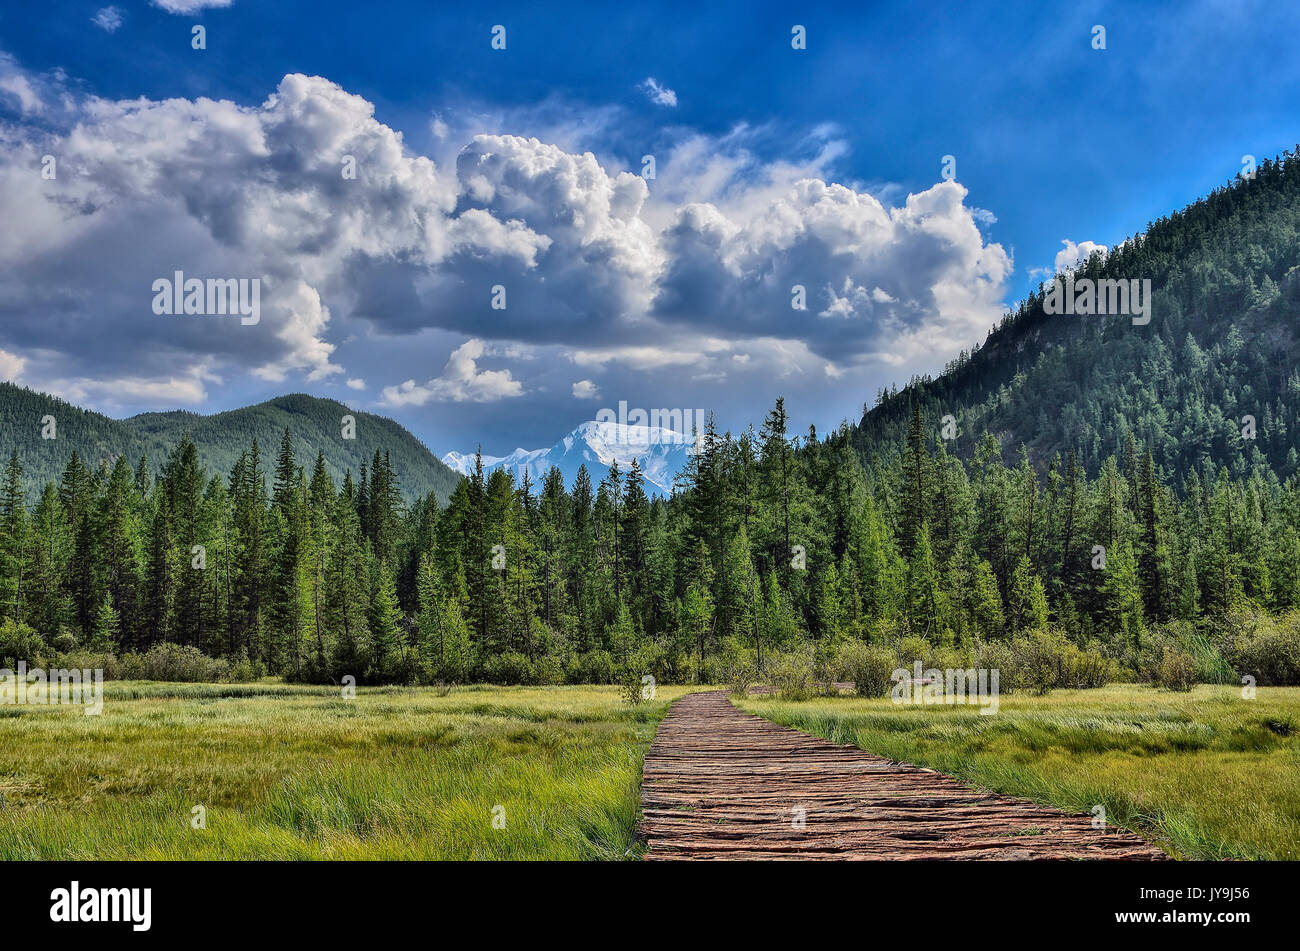 Summer mountain landscape with snowy peak, Altai, Russia. Wooden walkway through the mountainous swampy valley Stock Photo